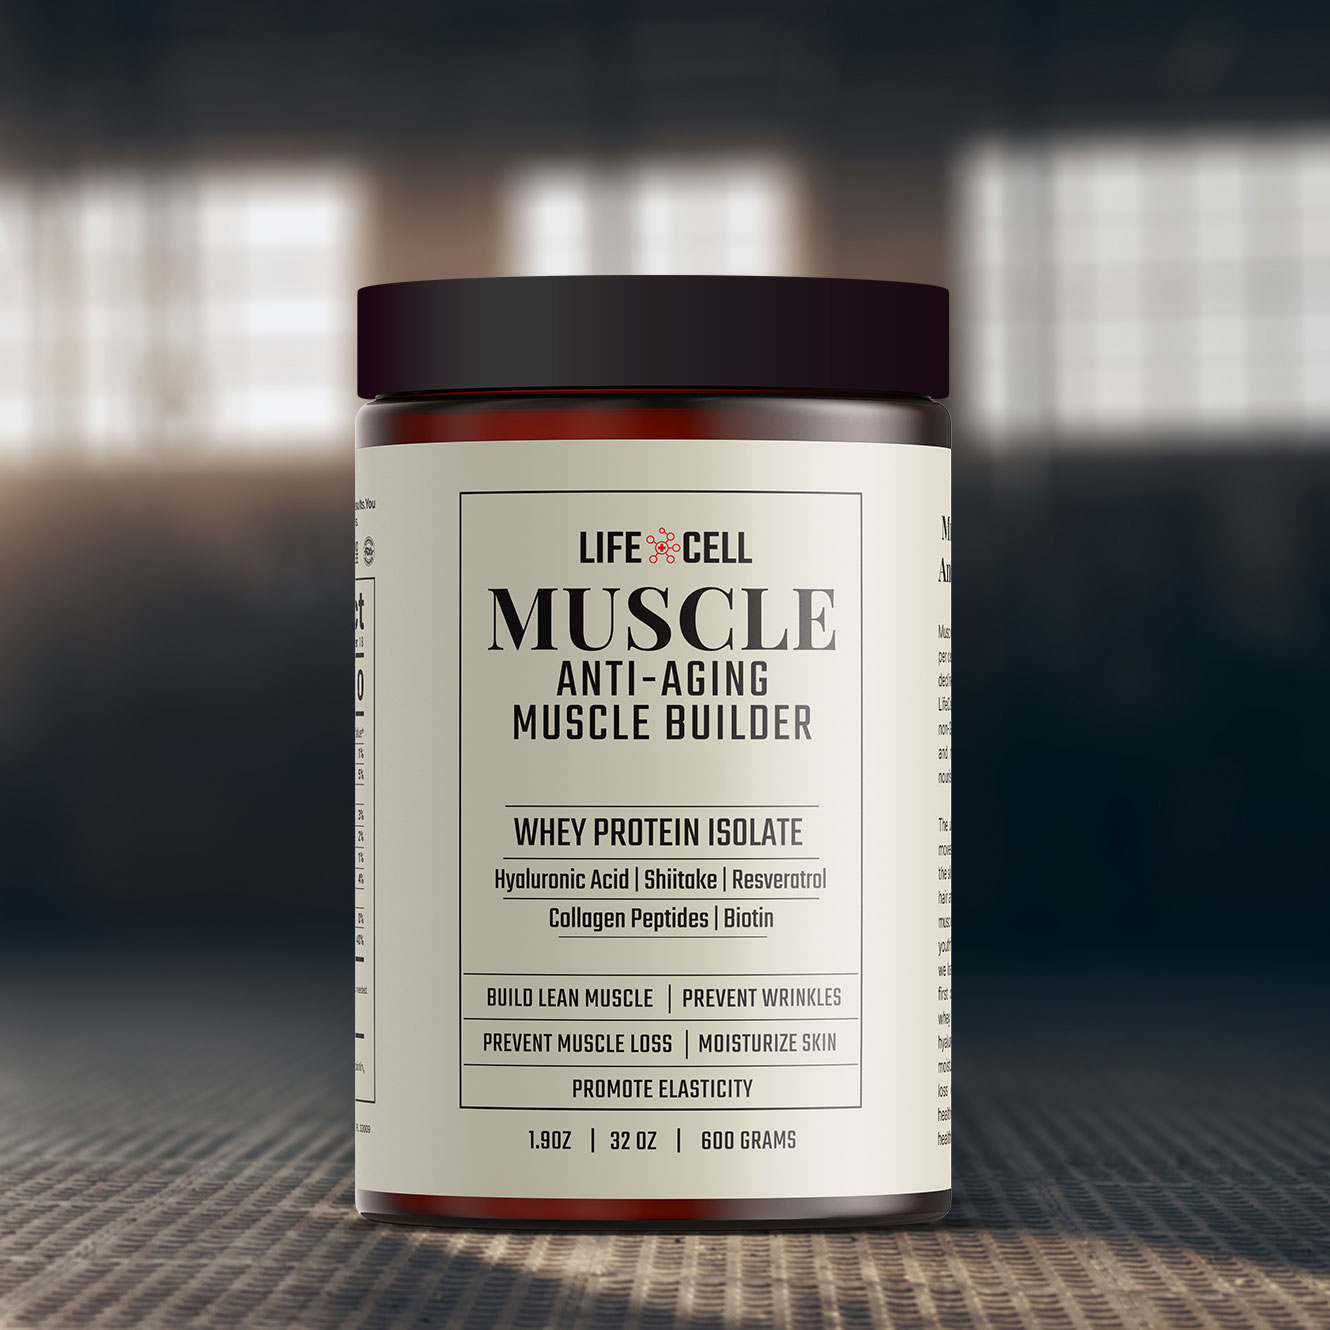 AntiAging Muscle Building Protein LifeCell